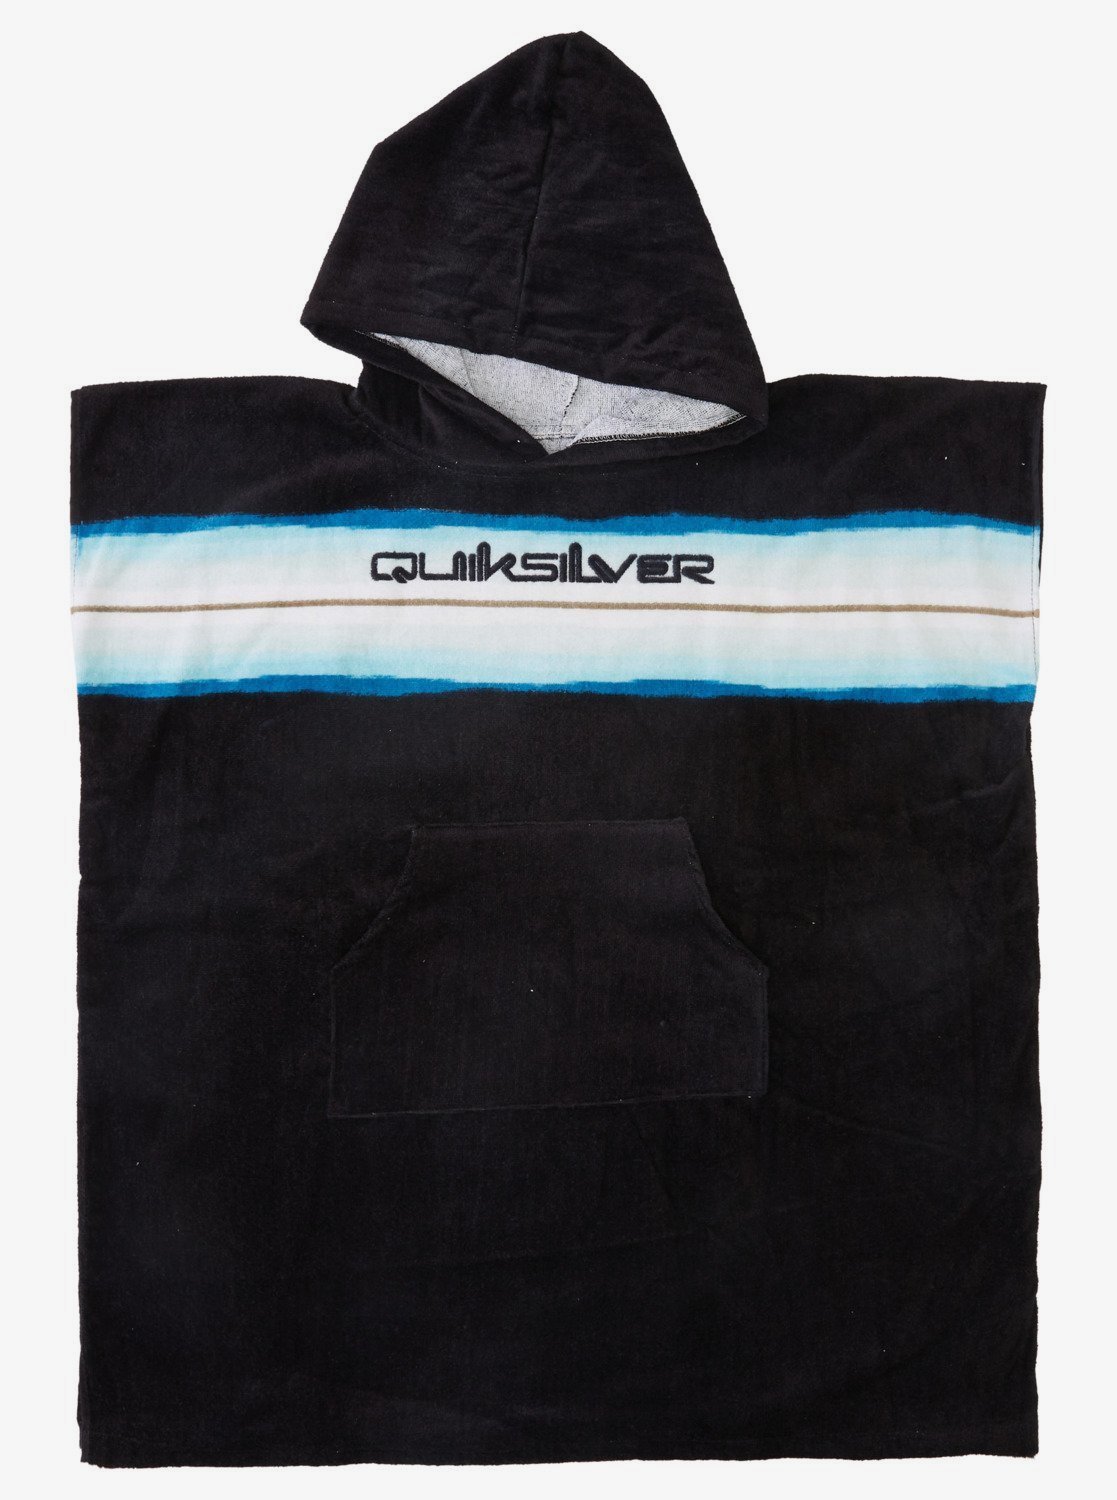 Quiksilver - Hooded towel for boys - Black & blue